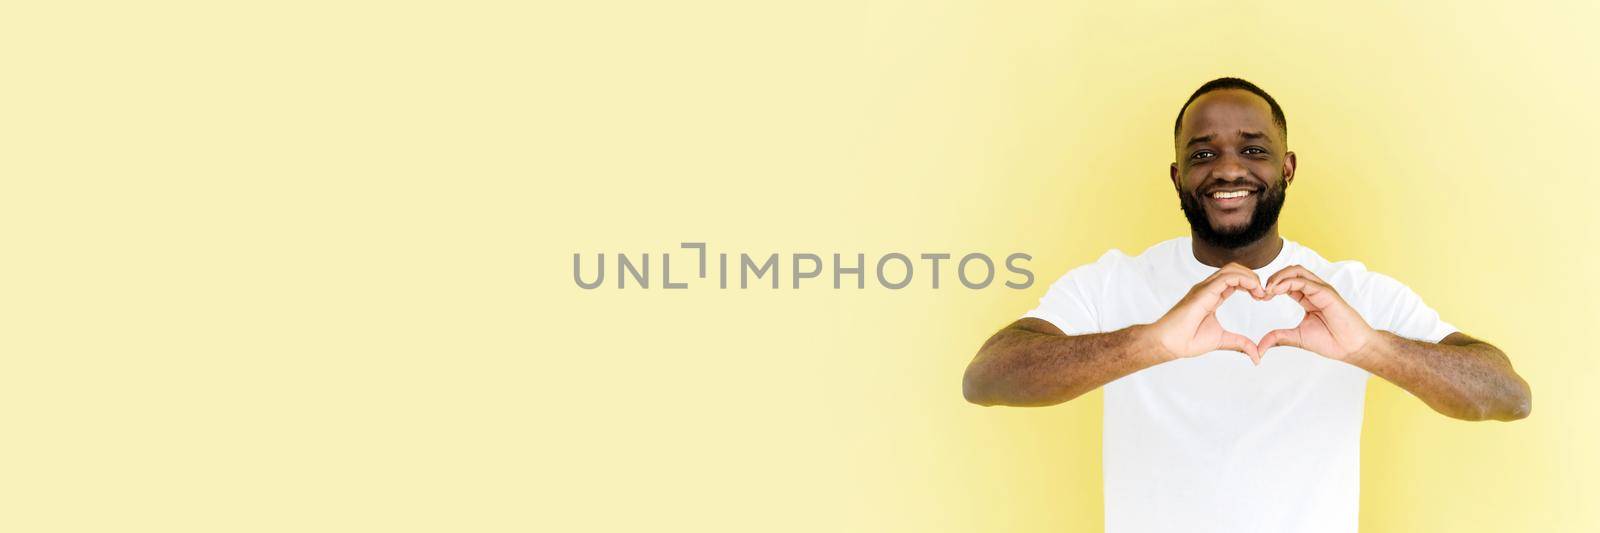 Web banner. Portrait of a handsome cheerful afro american man making a heart shape with his hands, expressing love feelings or friendship, smiling in love on a beige yellow background